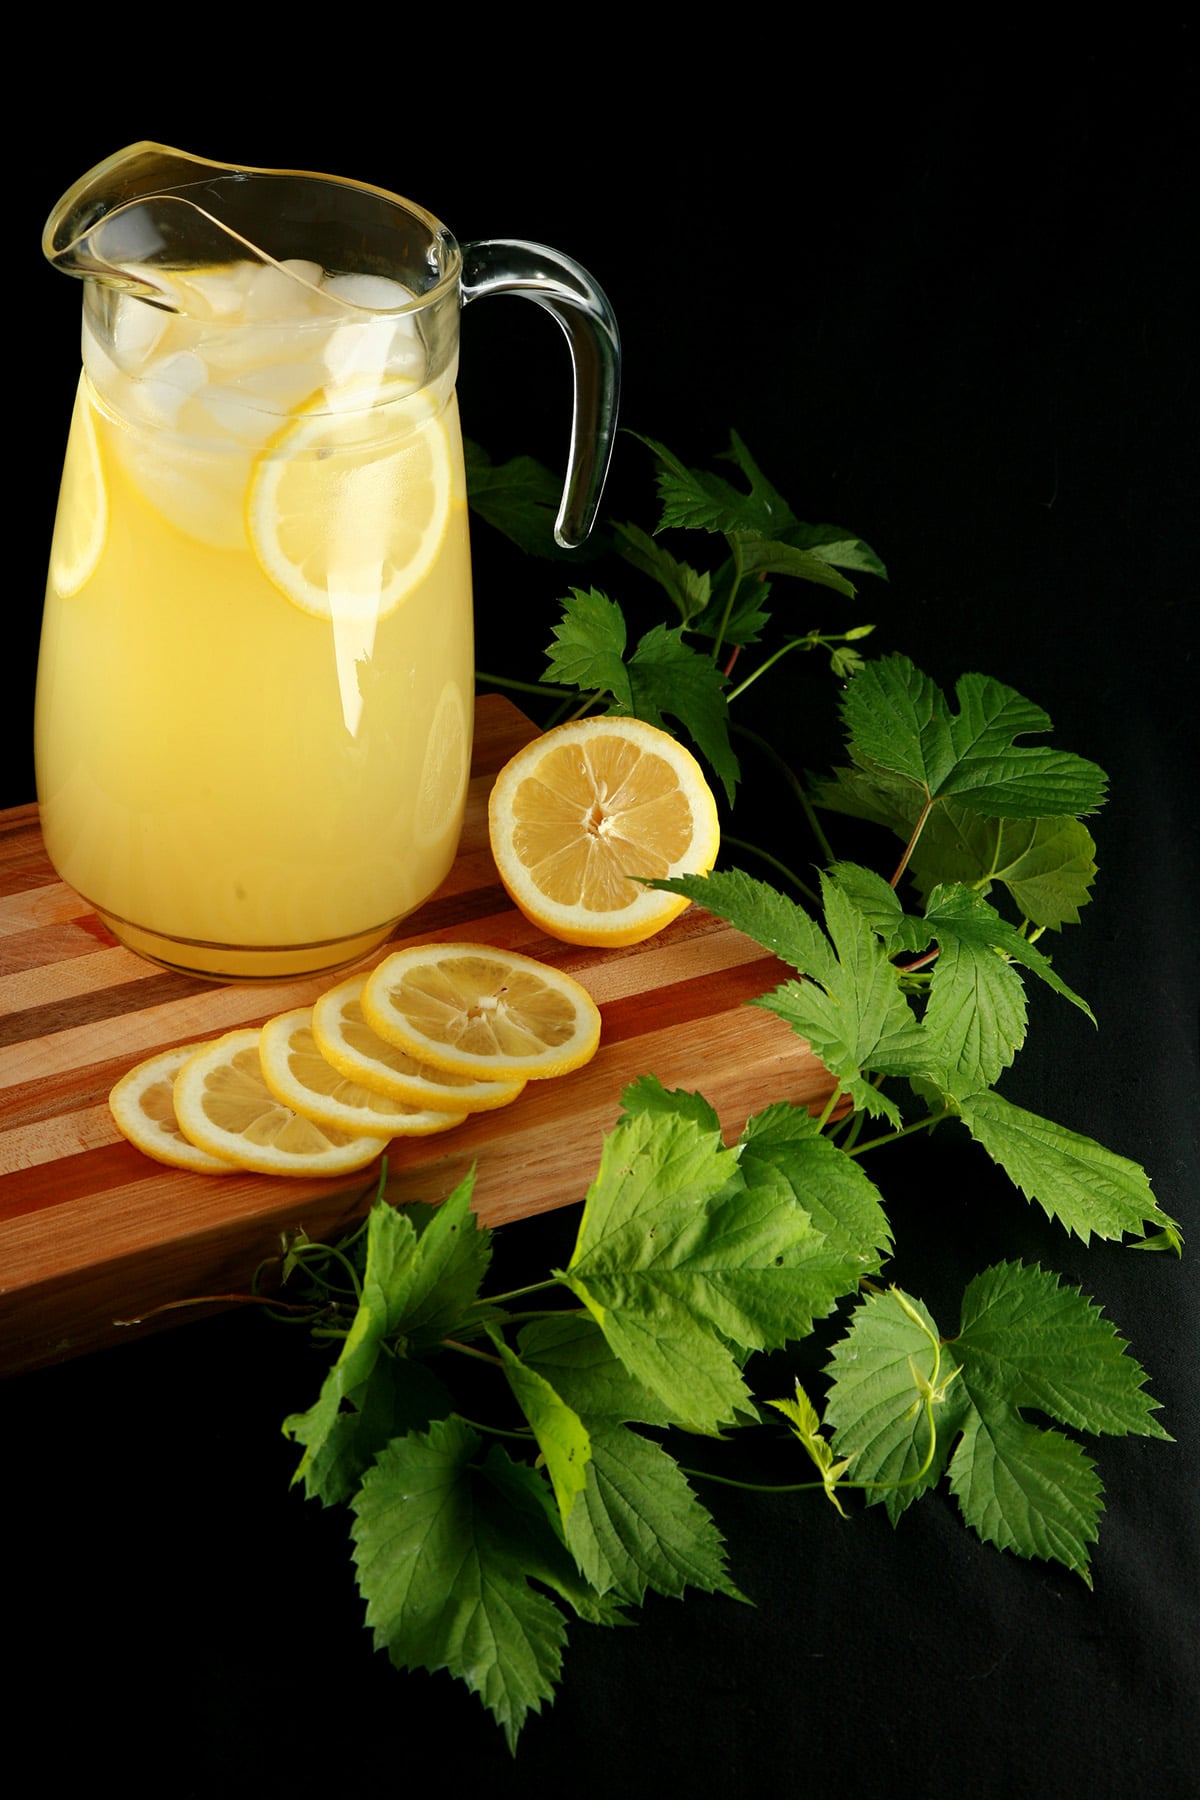 A pitcher of hop lemonade rests on a wooden board, with slices lemons and a hop bine next to it.